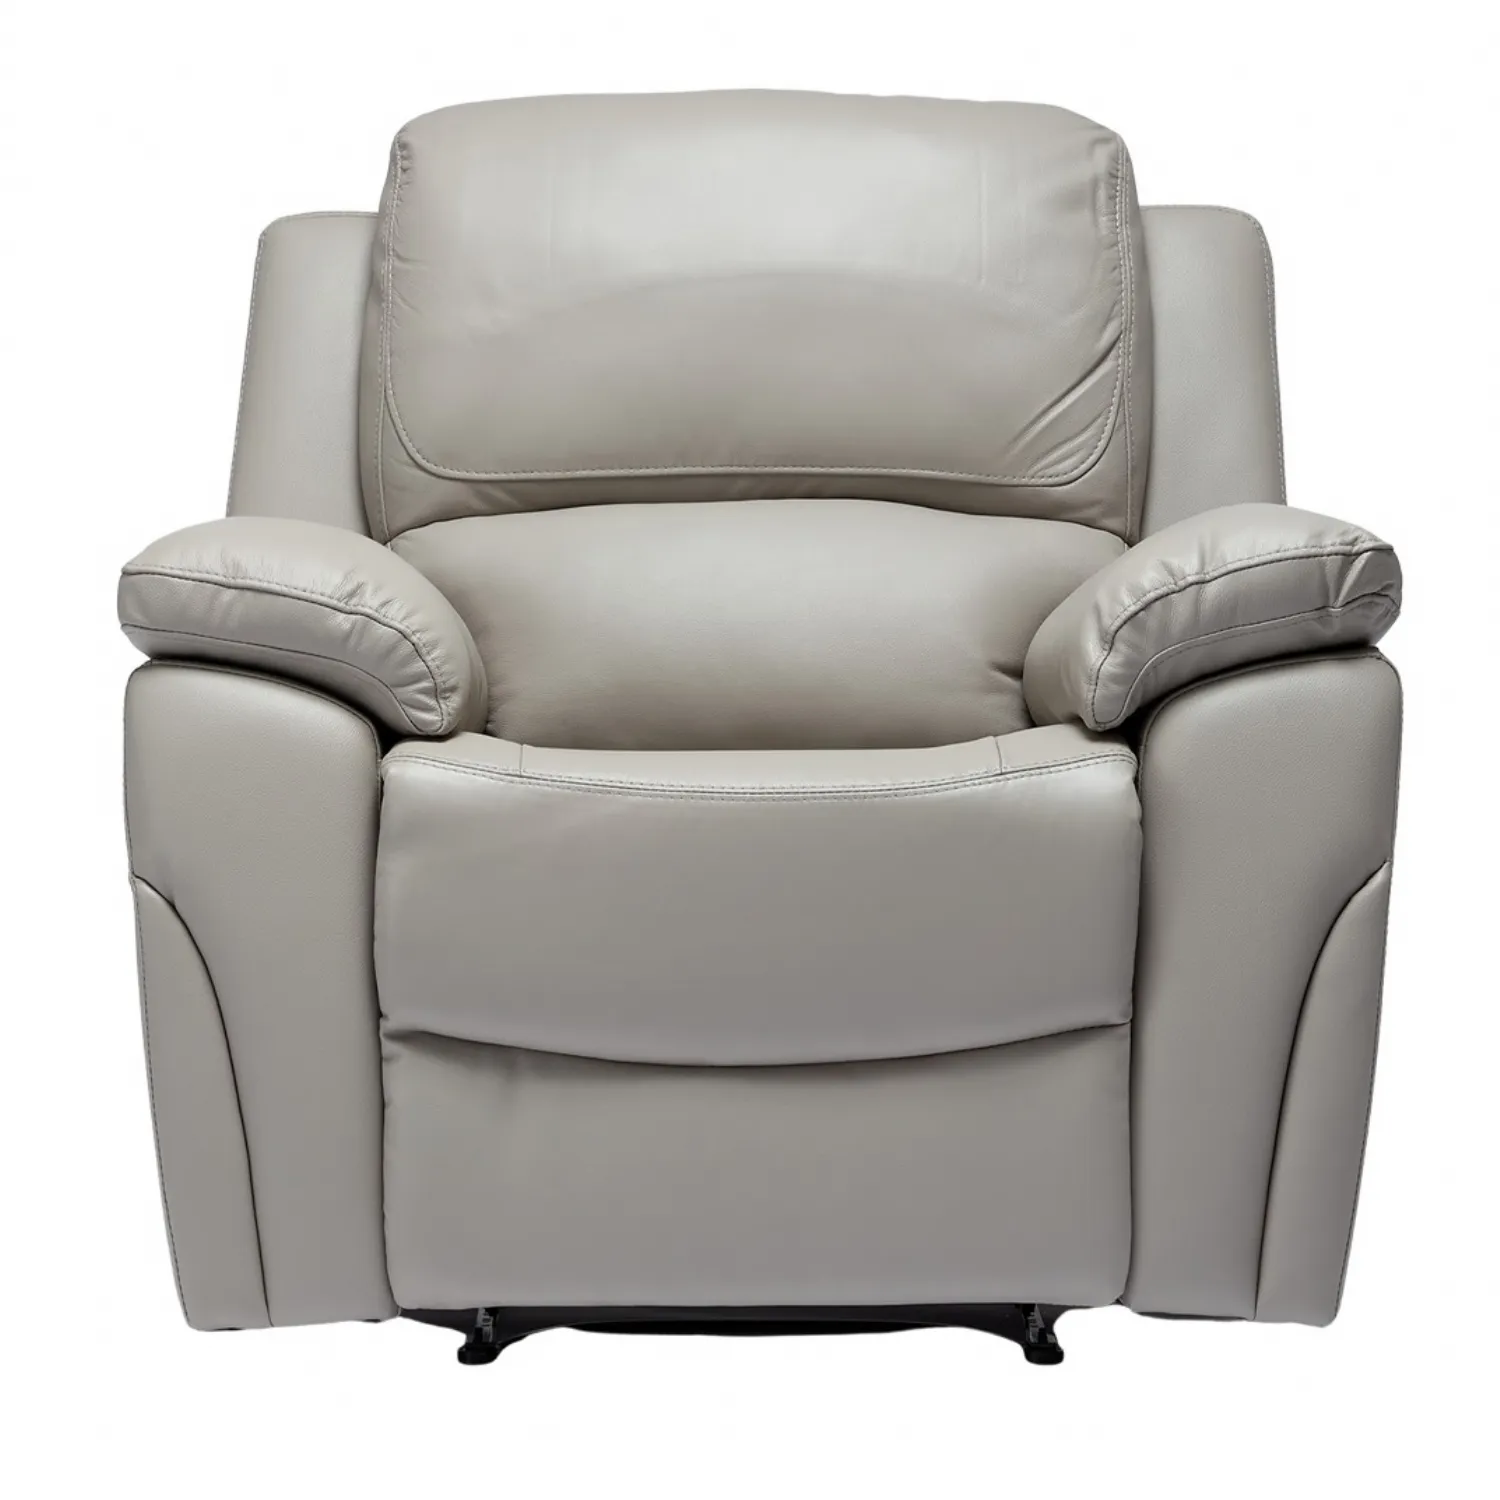 Leather Recliner Chair in Light Grey, Black or Sky Blue